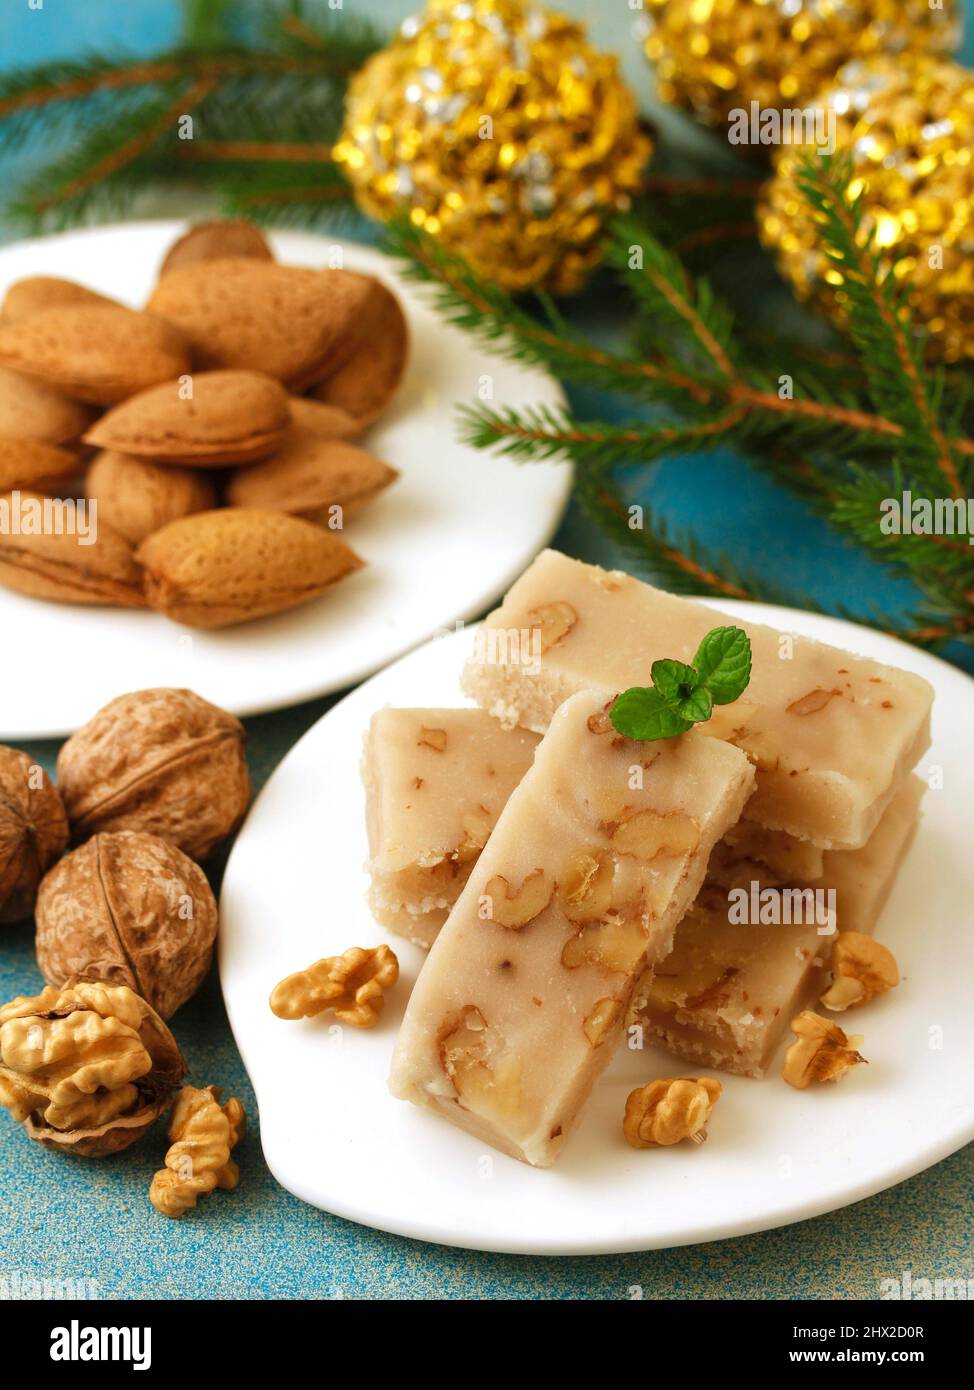 Turrón de mazapán y nueces. Marzipan nougat with walnuts. Typical dessert from Spain for Christmas. Stock Photo